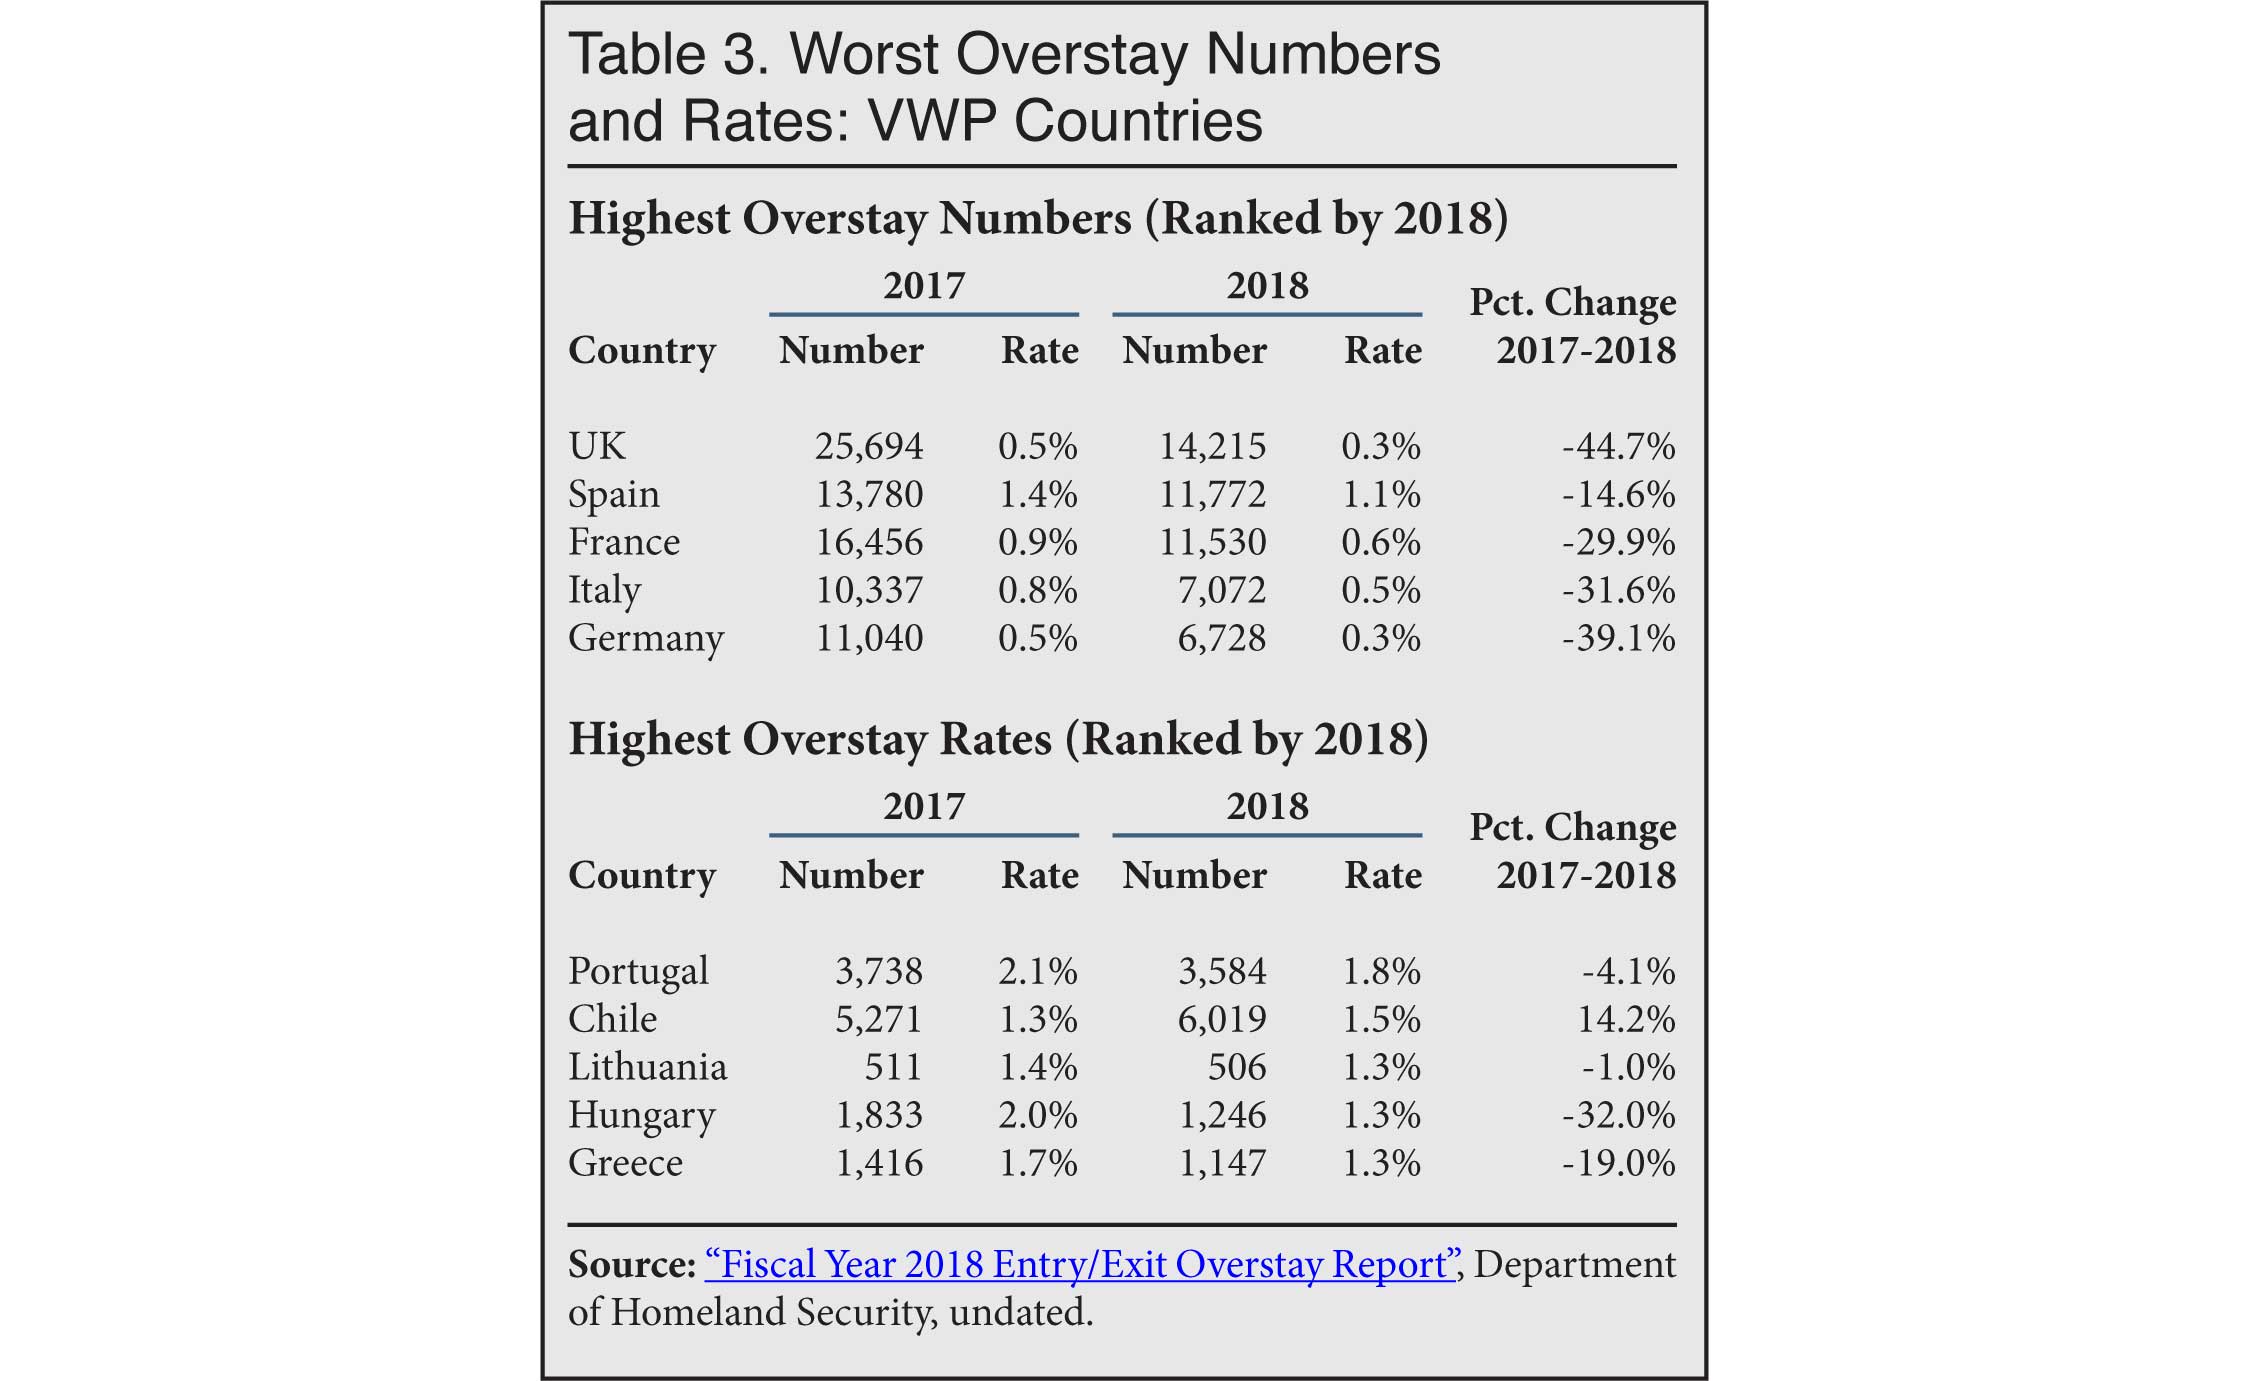 Table: Worst Visa Overstay Numbers and Rates, VWP Countries, 2018